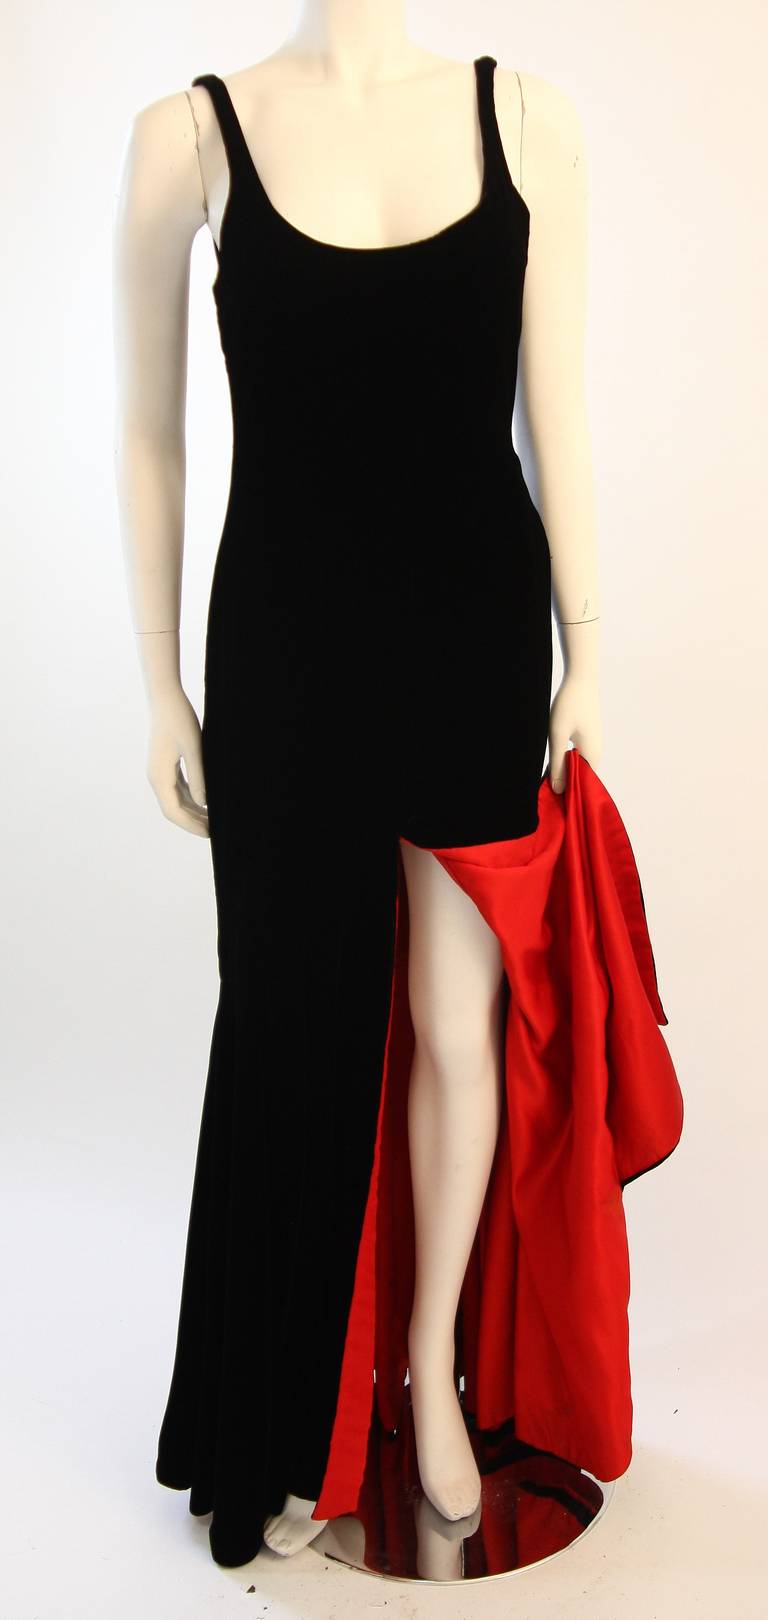 black dress with red lining